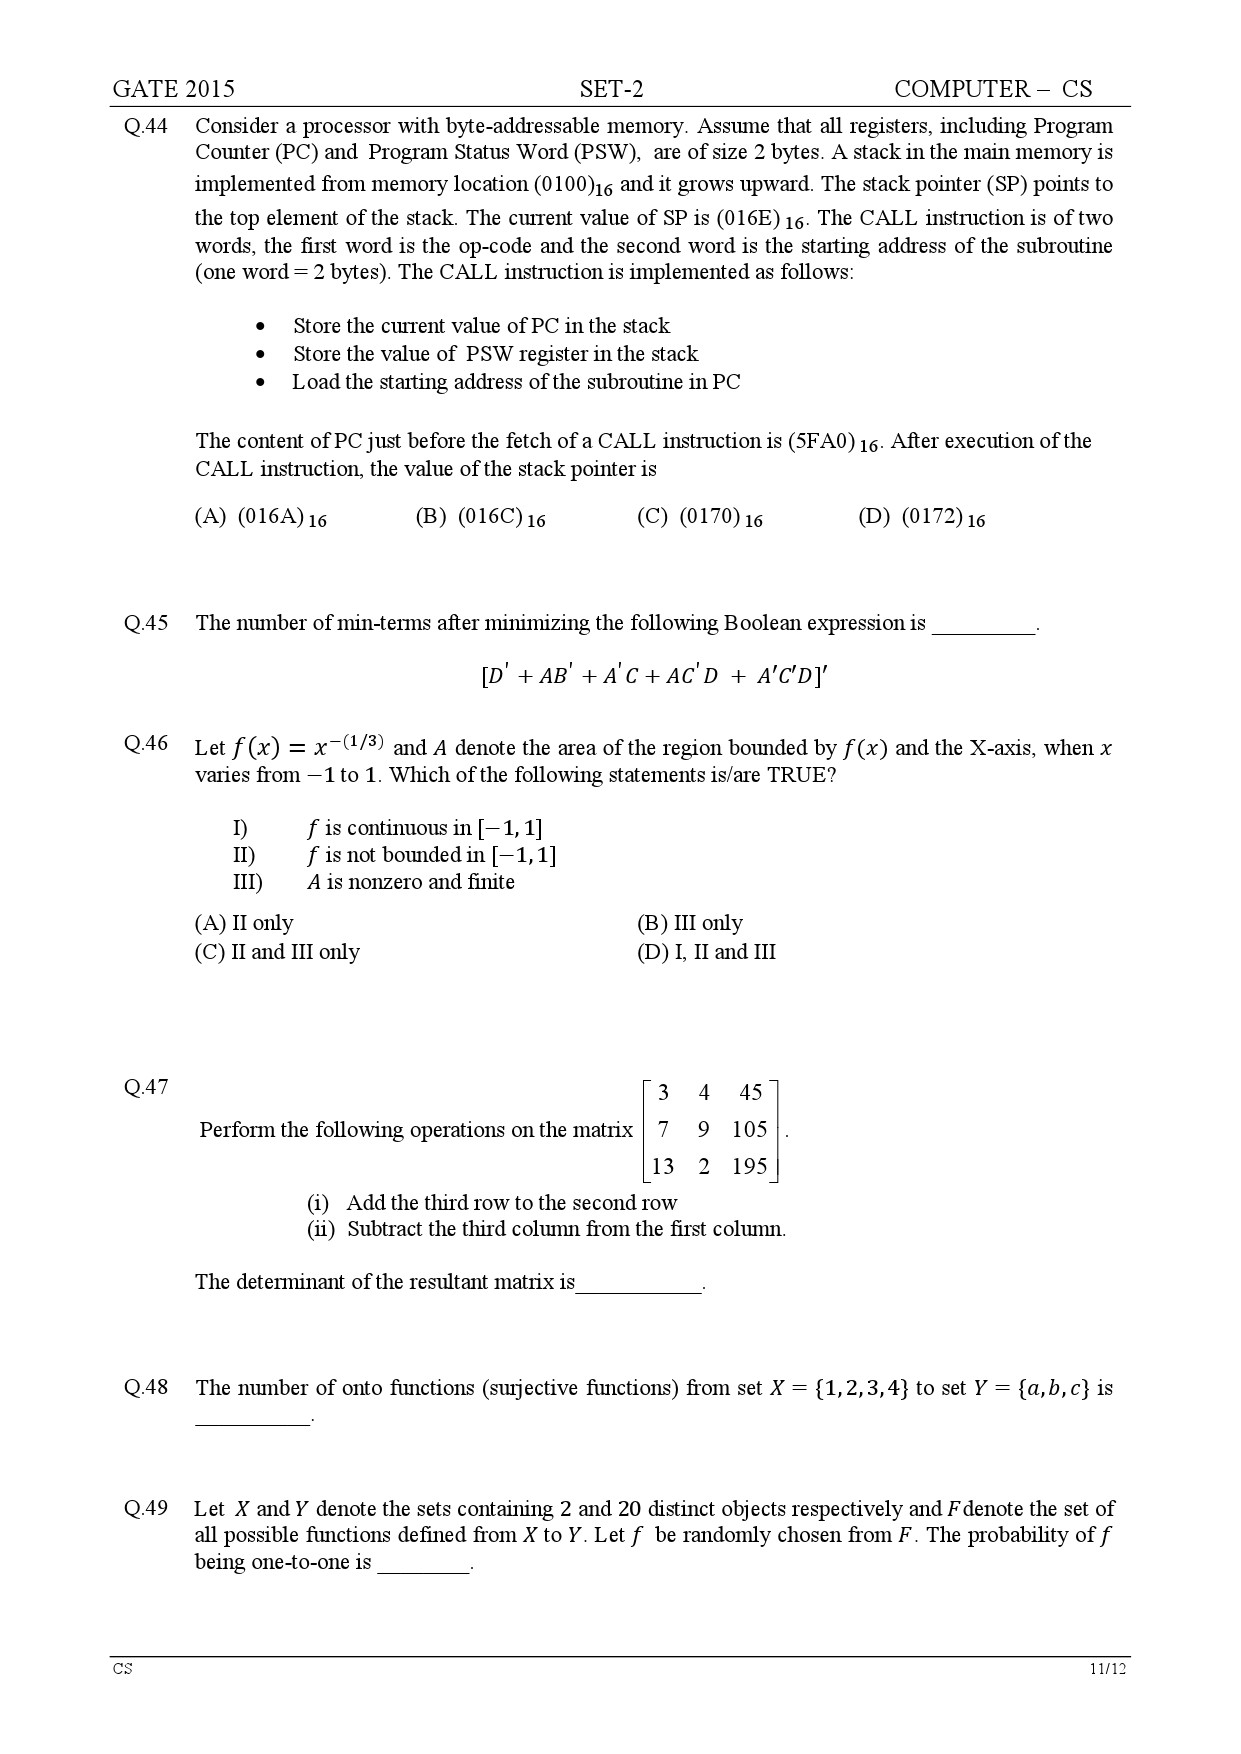 GATE Exam Question Paper 2015 Computer Science and Information Technology Set 2 11